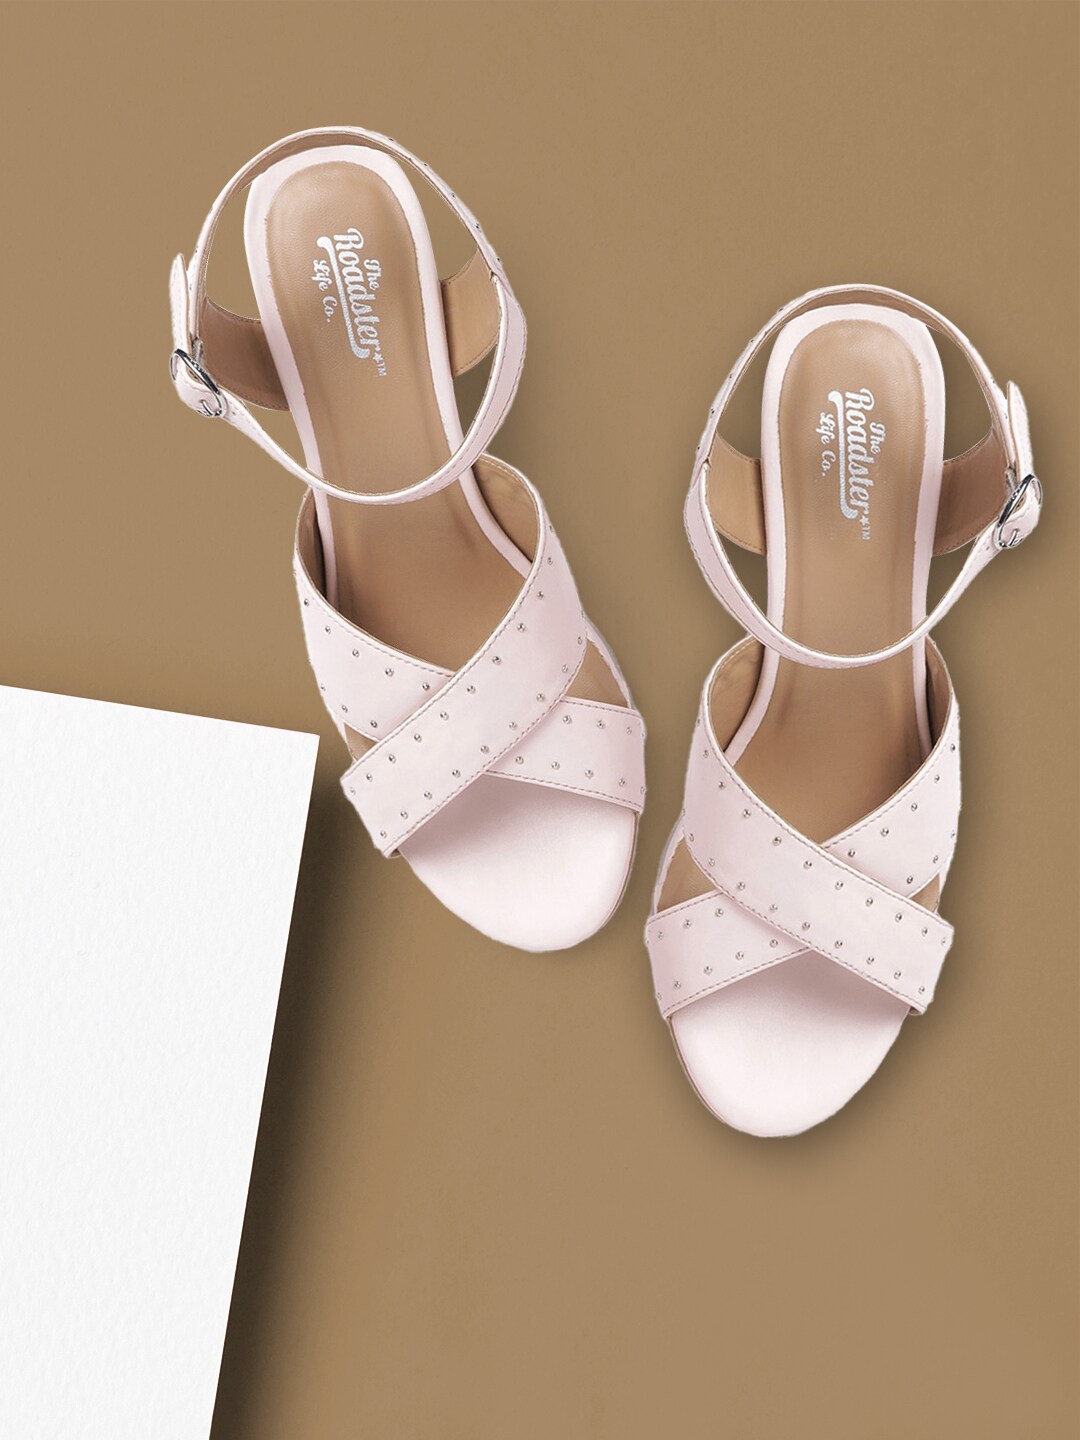 The Roadster Lifestyle Co Women Light Pink & Silver-Toned Embellished Block Heels Price in India